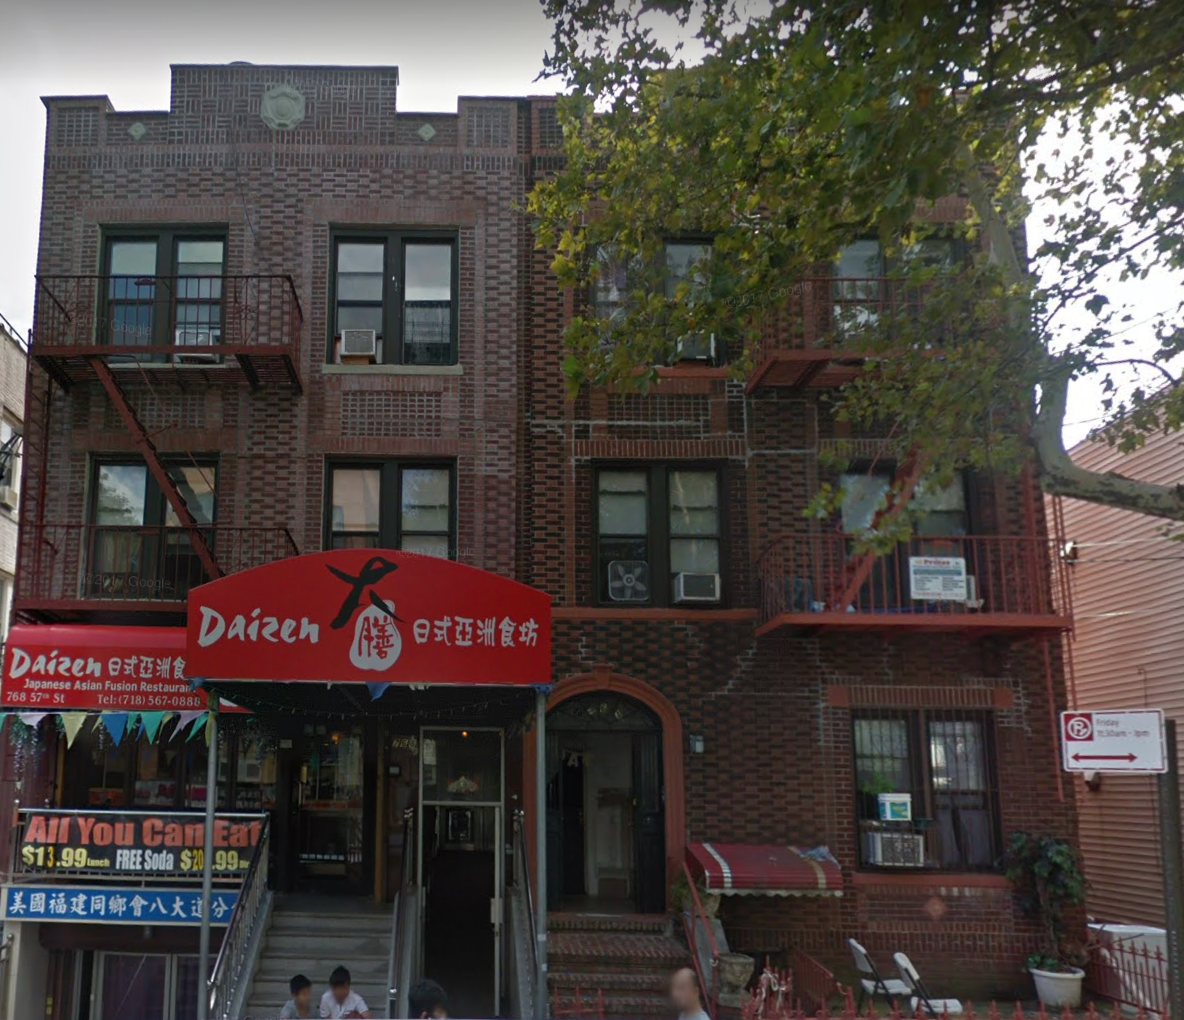 Sunset Park Fire Sends 5 Firefighters To The Hospital